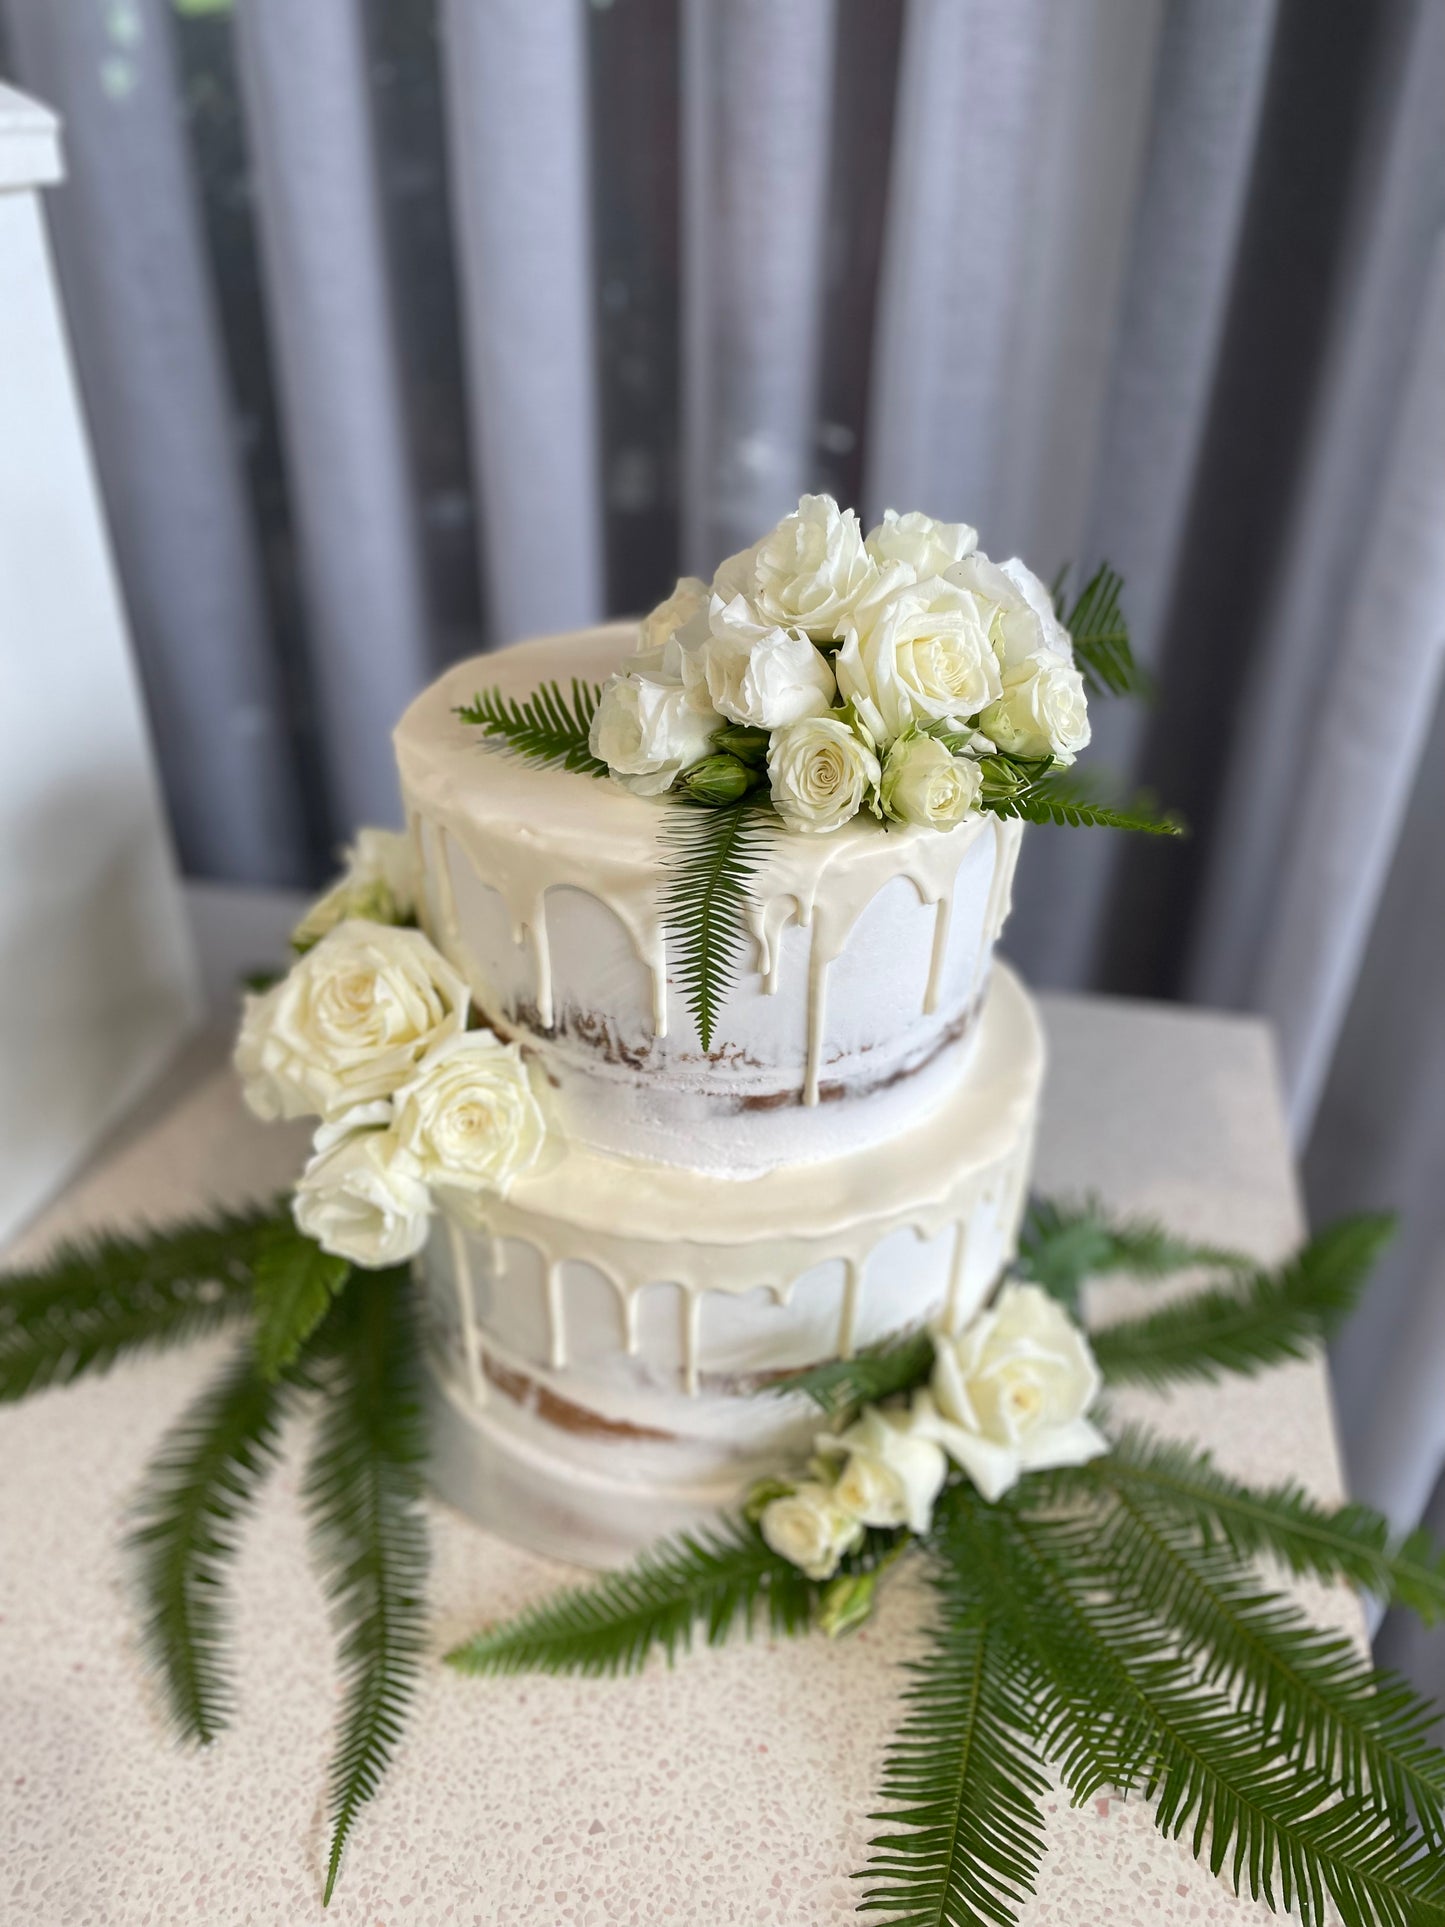 2 Tier Semi Naked with White Drizzle & White Flowers